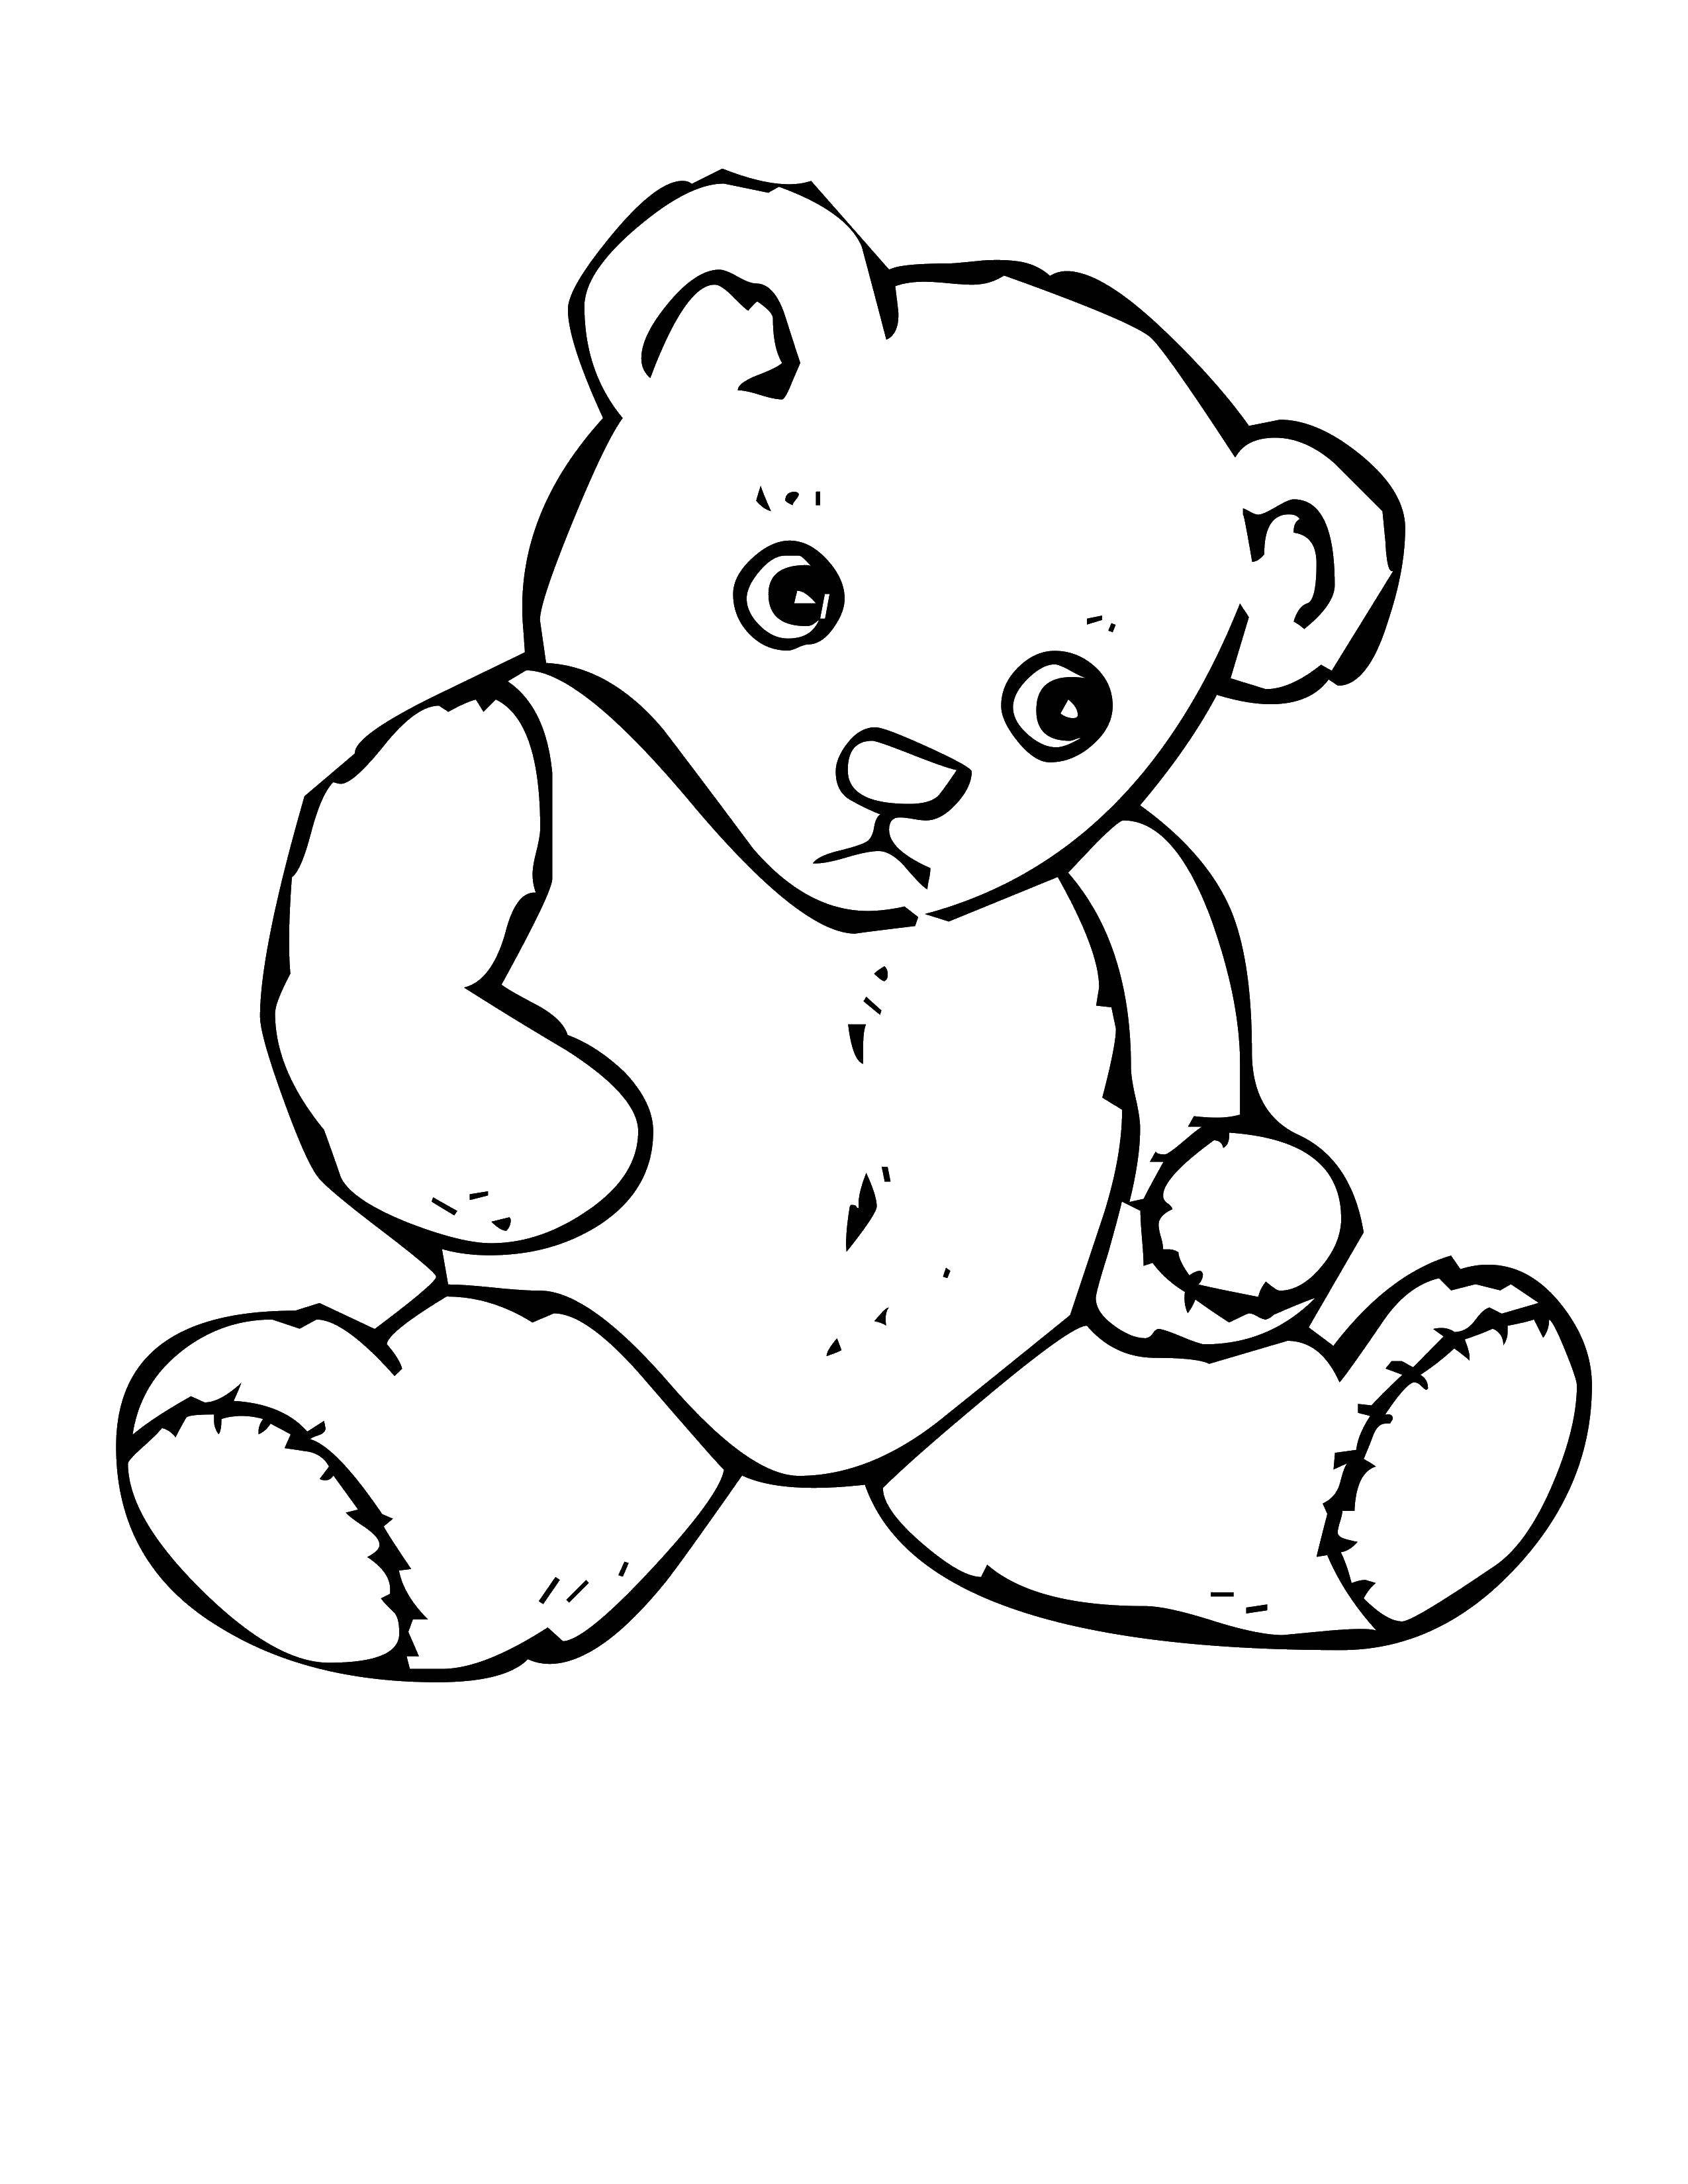 Coloring Hurt the bear. Category toys. Tags:  Toy, bear.